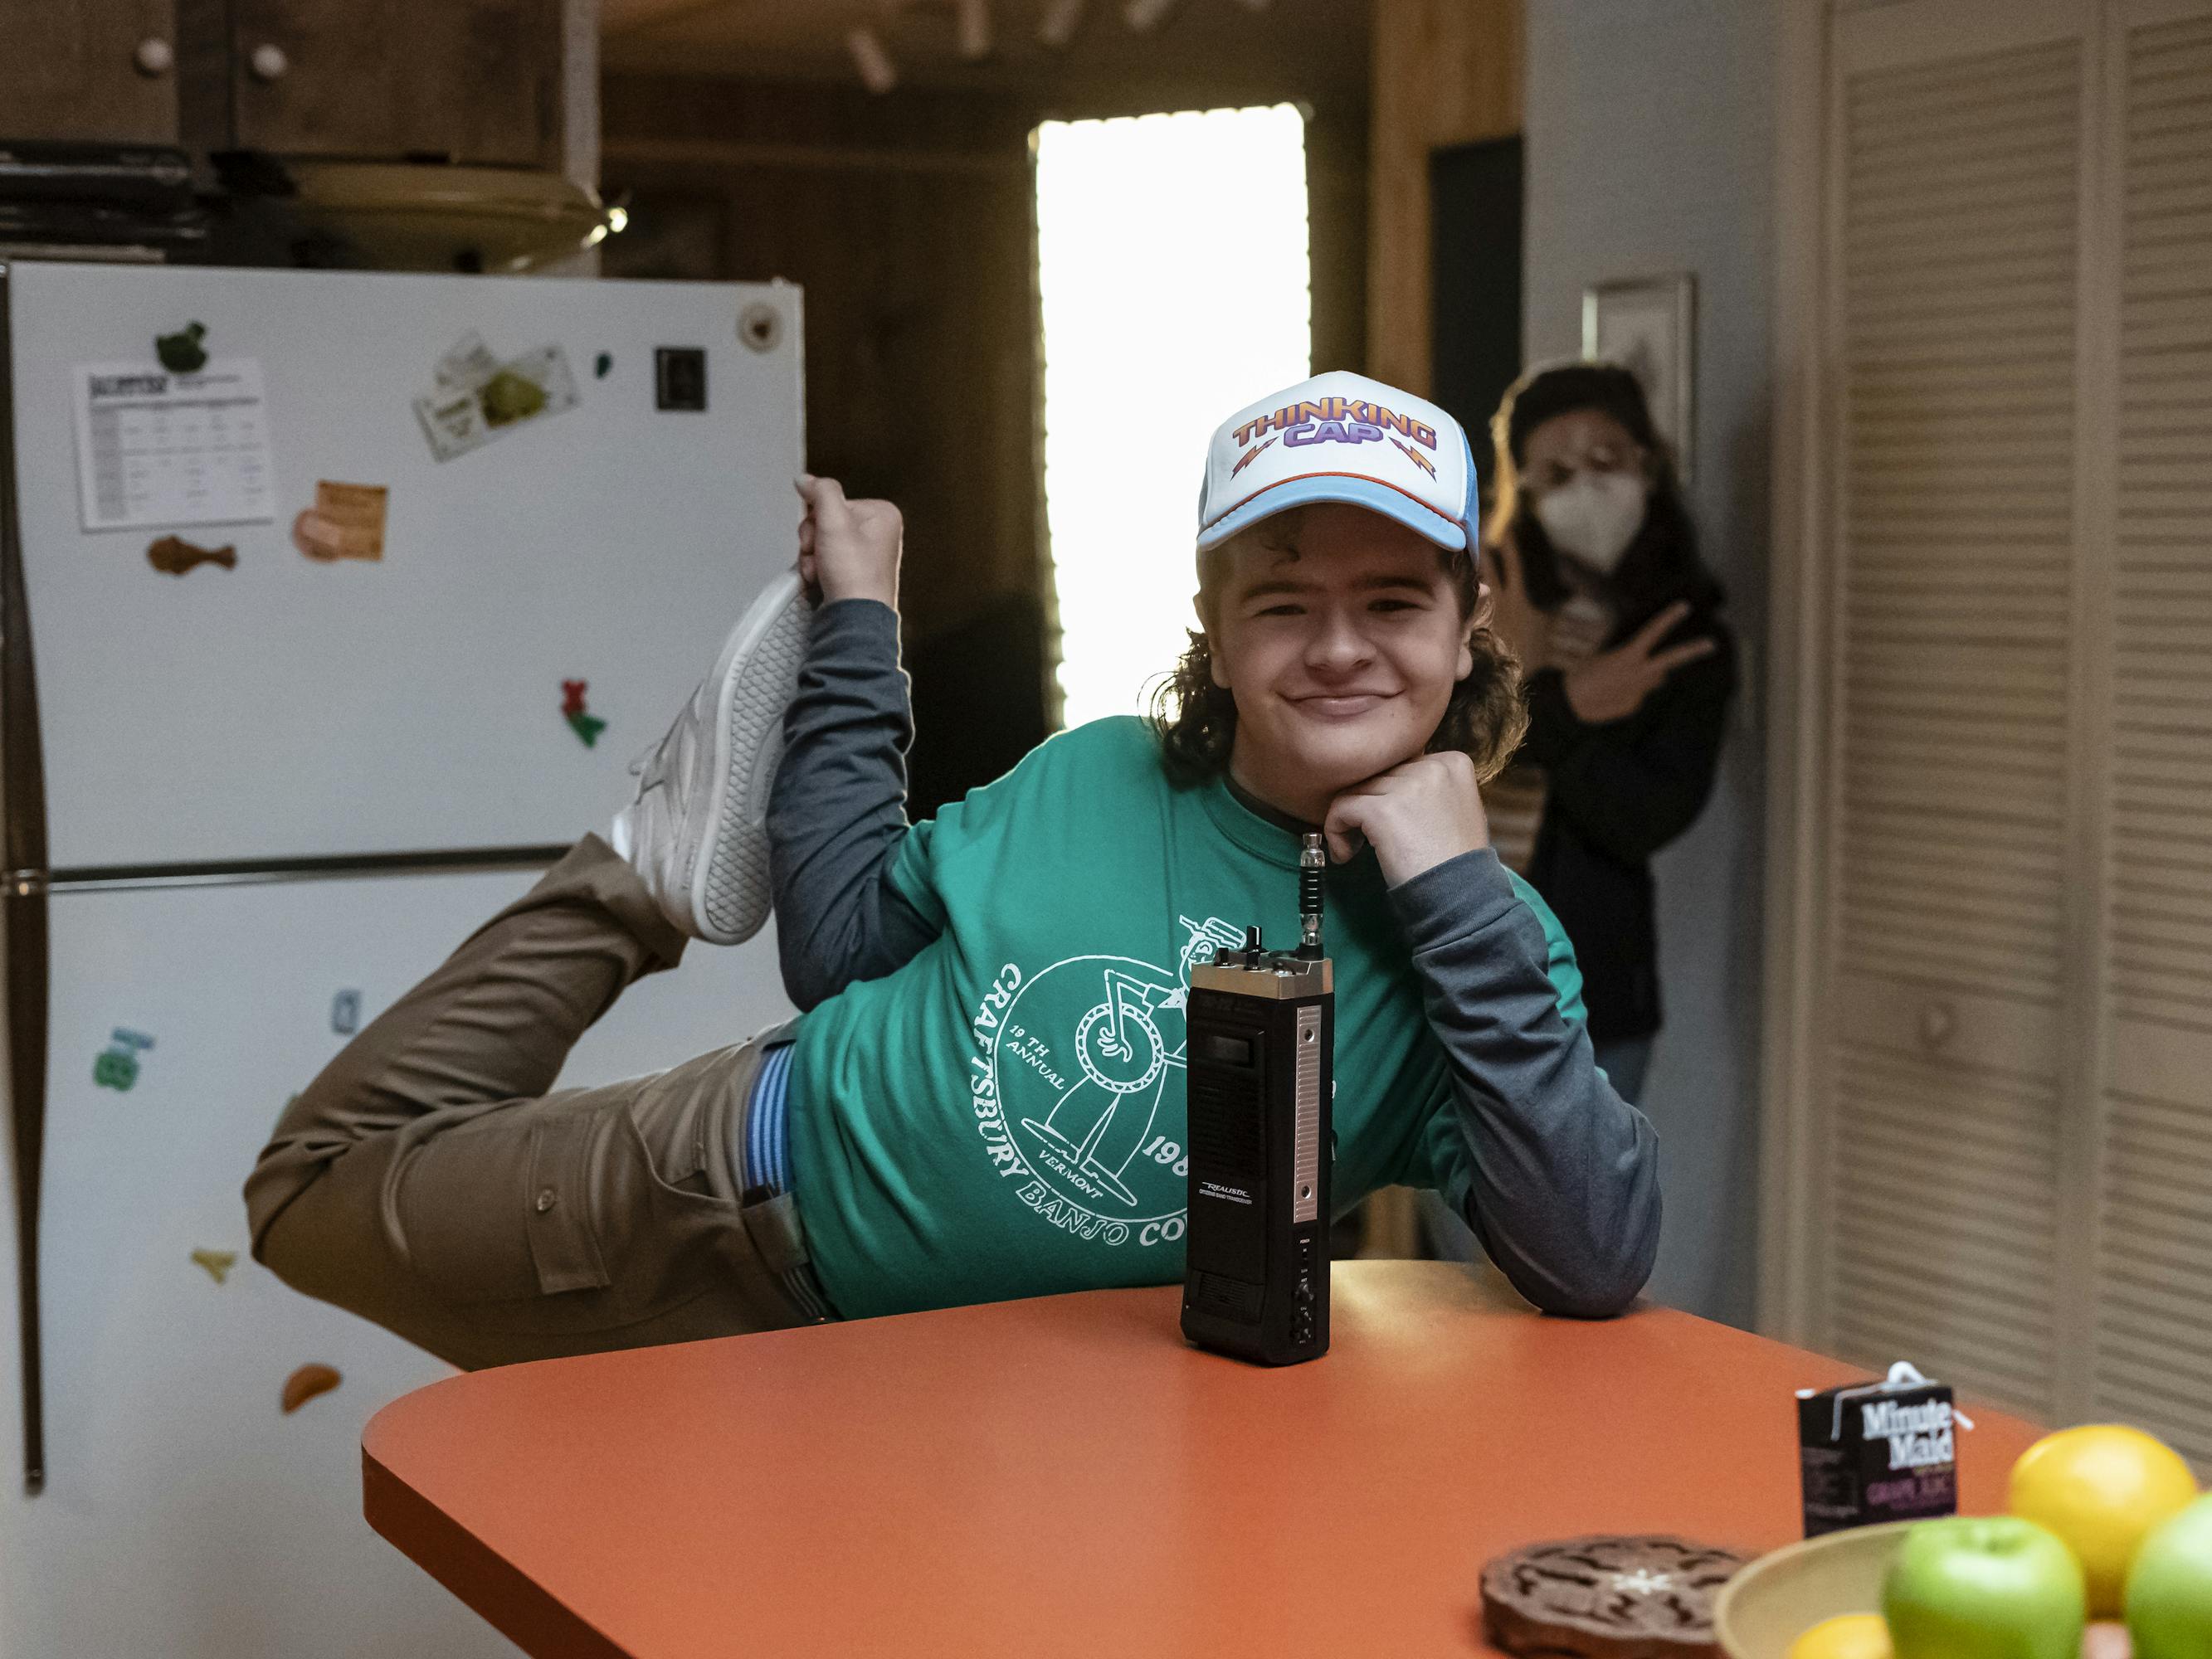 Dustin Henderson (Gaten Matarazzo) does the dancer yoga position and smiles, as he rests his chin in his palm.